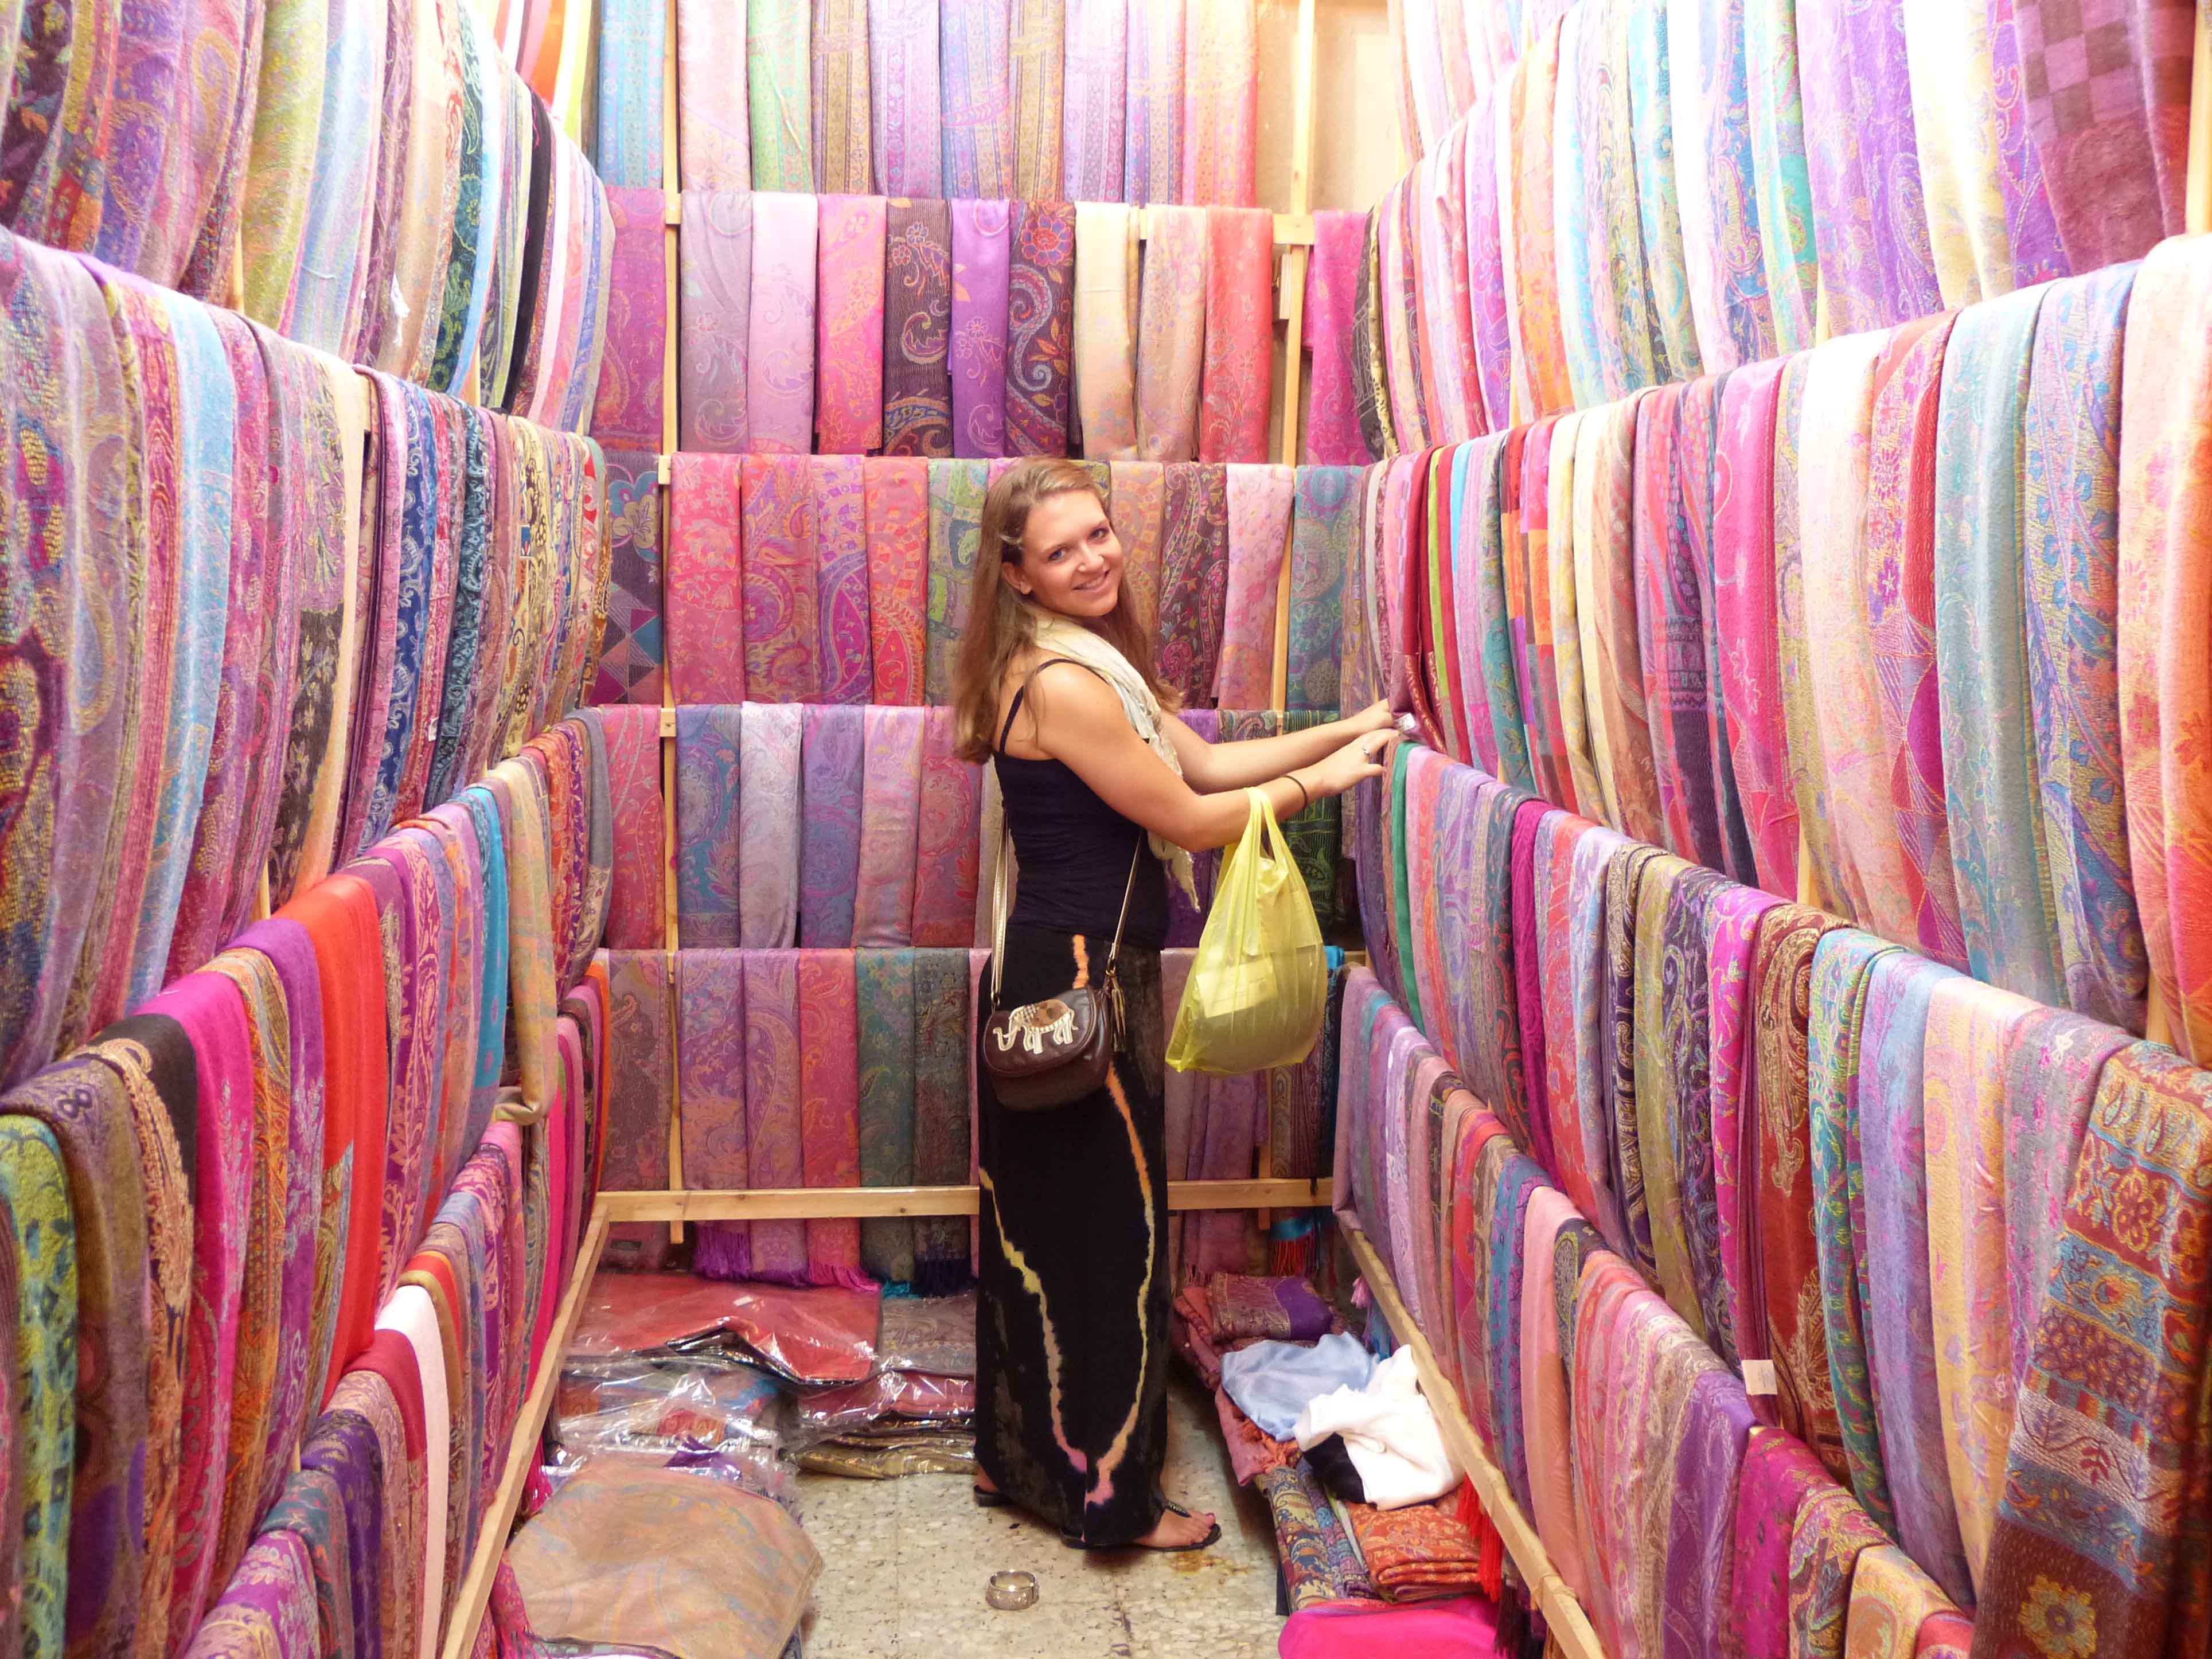 Student checking out the beautiful silk scarves in the market in Haifa, Israel.